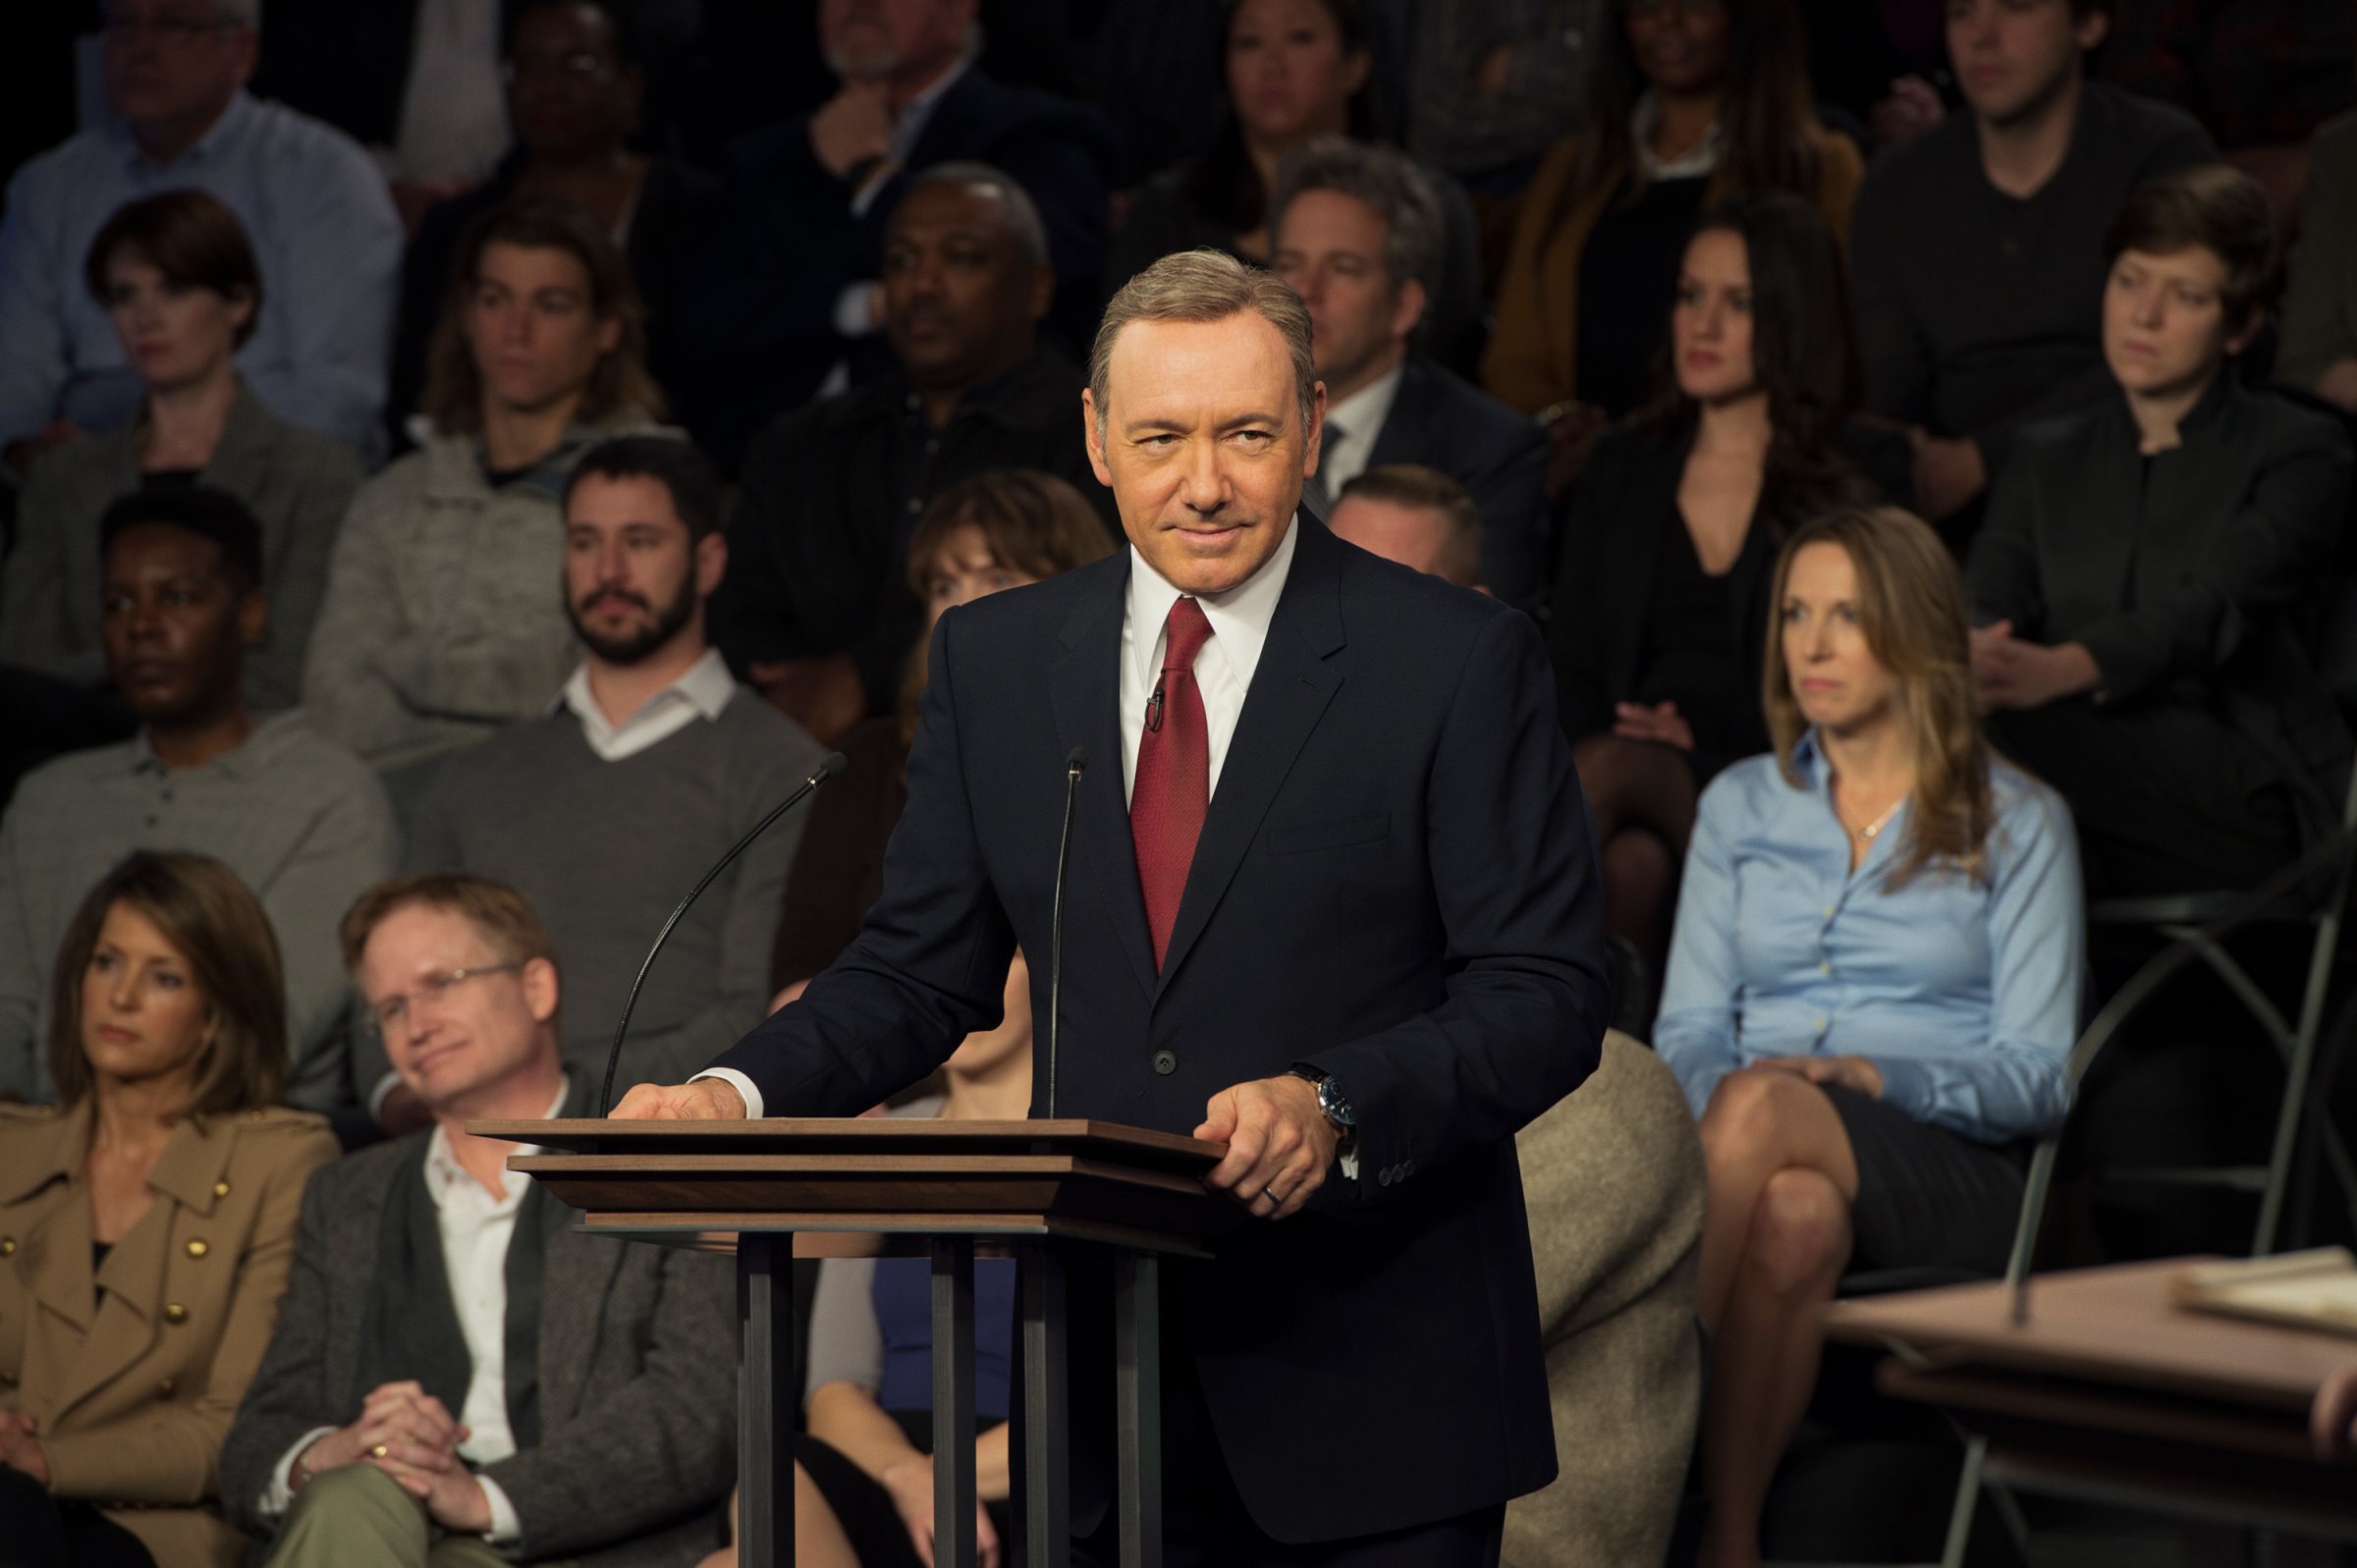 Kevin Spacey as Frank Underwood in Season 3 of House of Cards